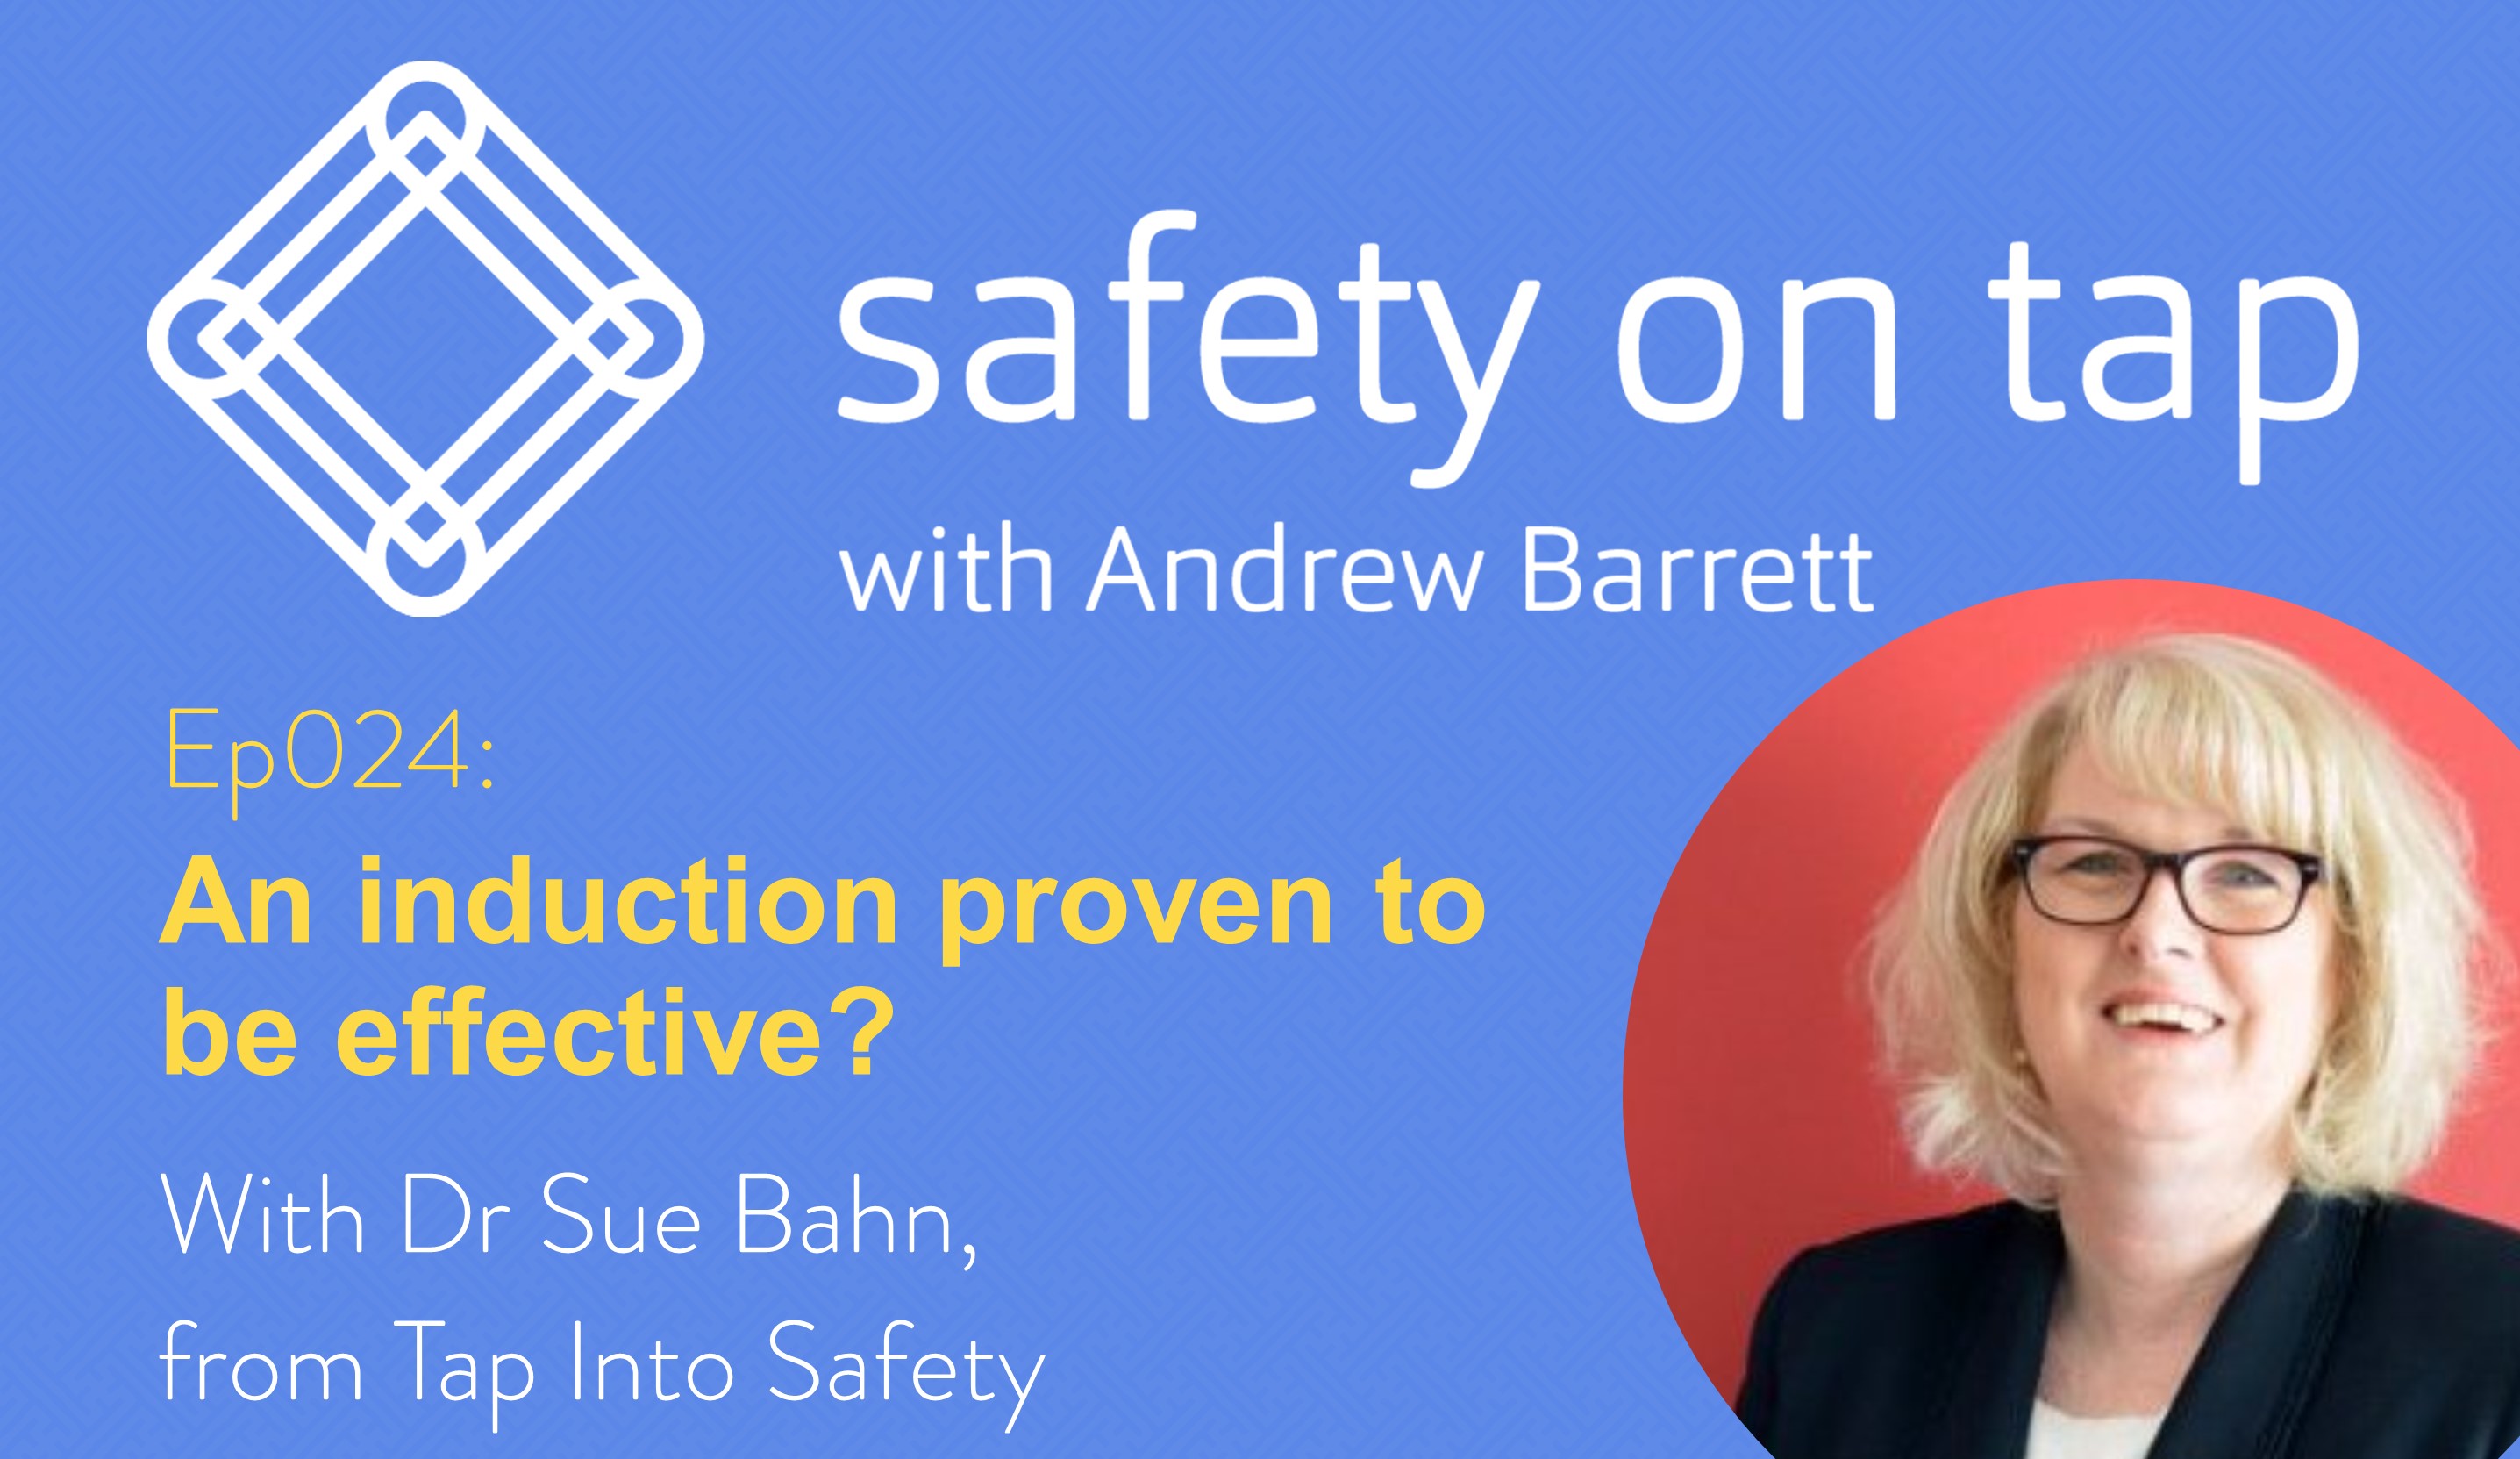 Ep024: An induction proven to be effective? with Dr Sue Bahn, from Tap Into Safety